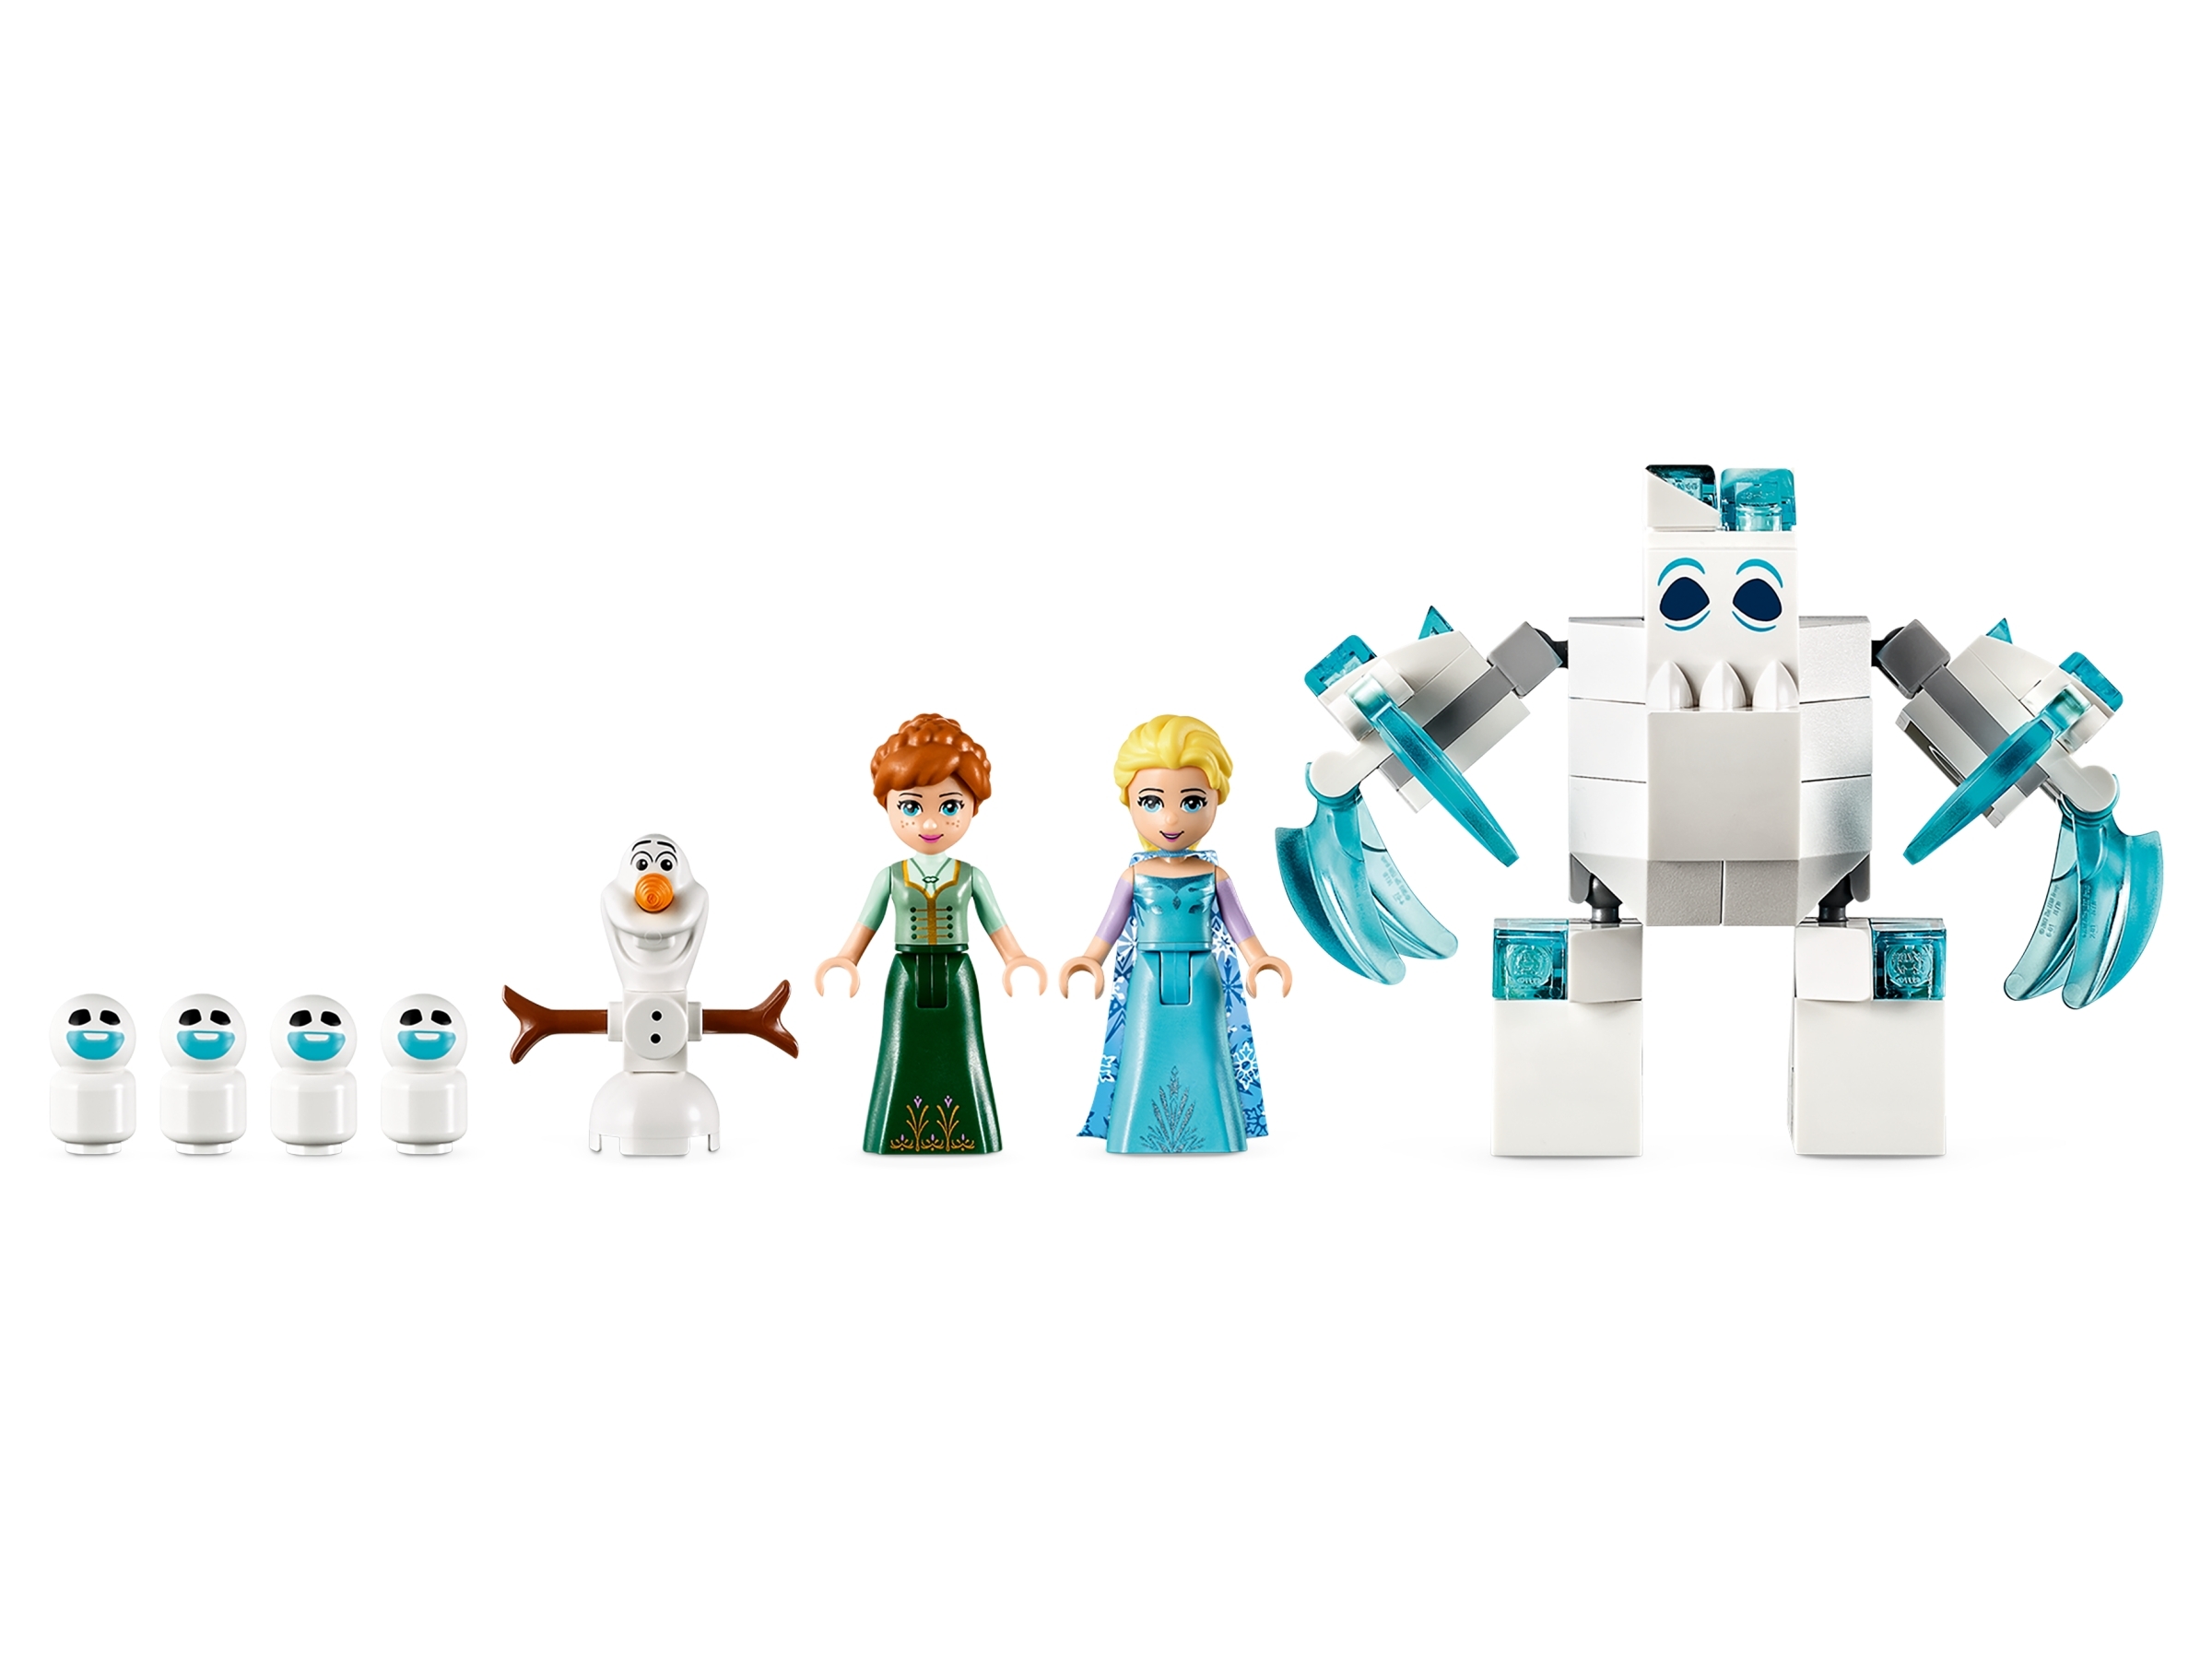 New 2019 Castle Playset with Popular Frozen Characters Including Elsa Anna and More Olaf LEGO Disney Princess Elsas Magical Ice Palace 43172 Toy Castle Building Kit with Mini Dolls 701 Pieces 